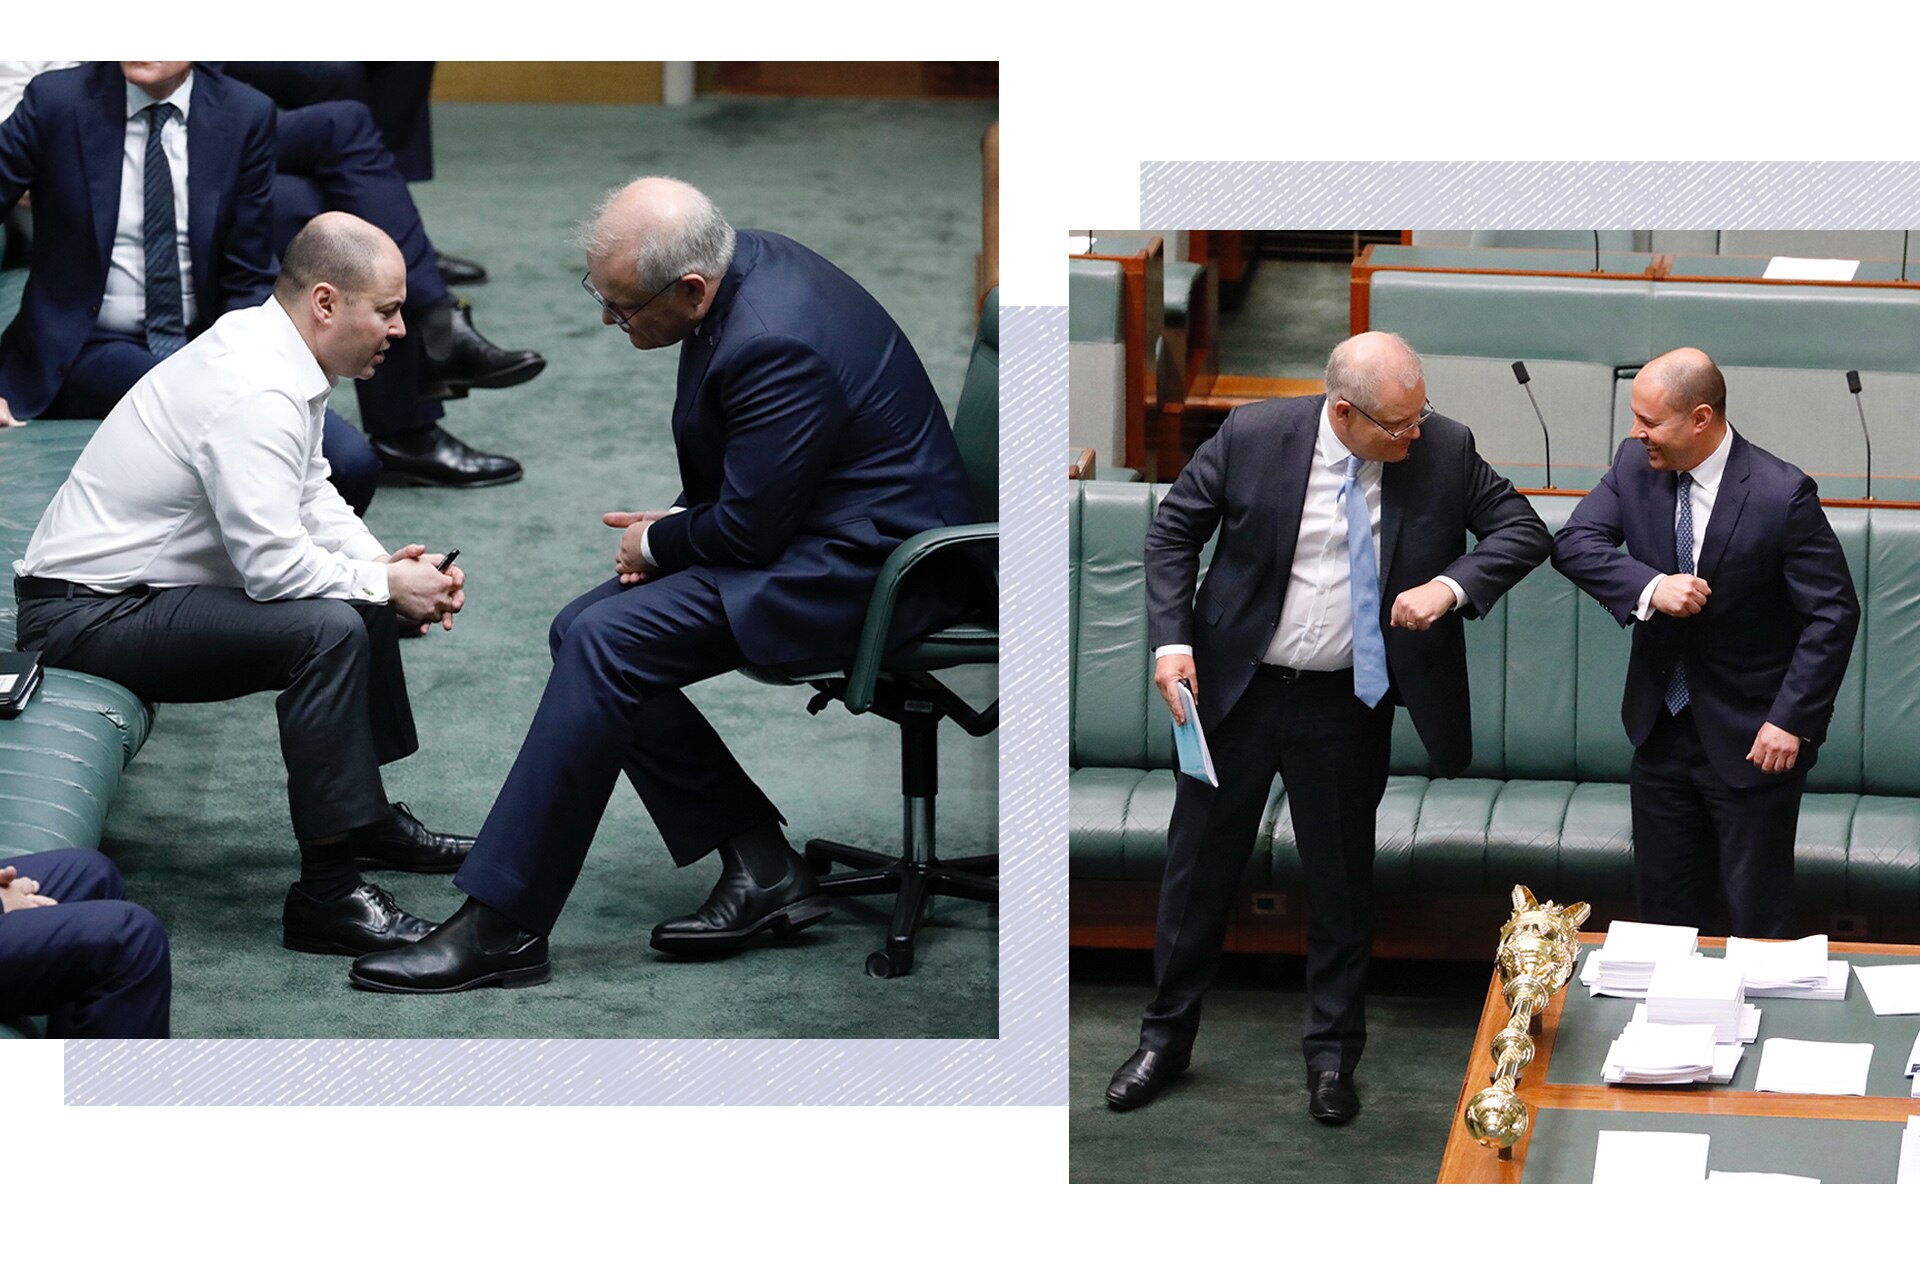 Josh Frydenberg and Scott Morrison speak together in parliament; in another image from parliament, they bump elbows.